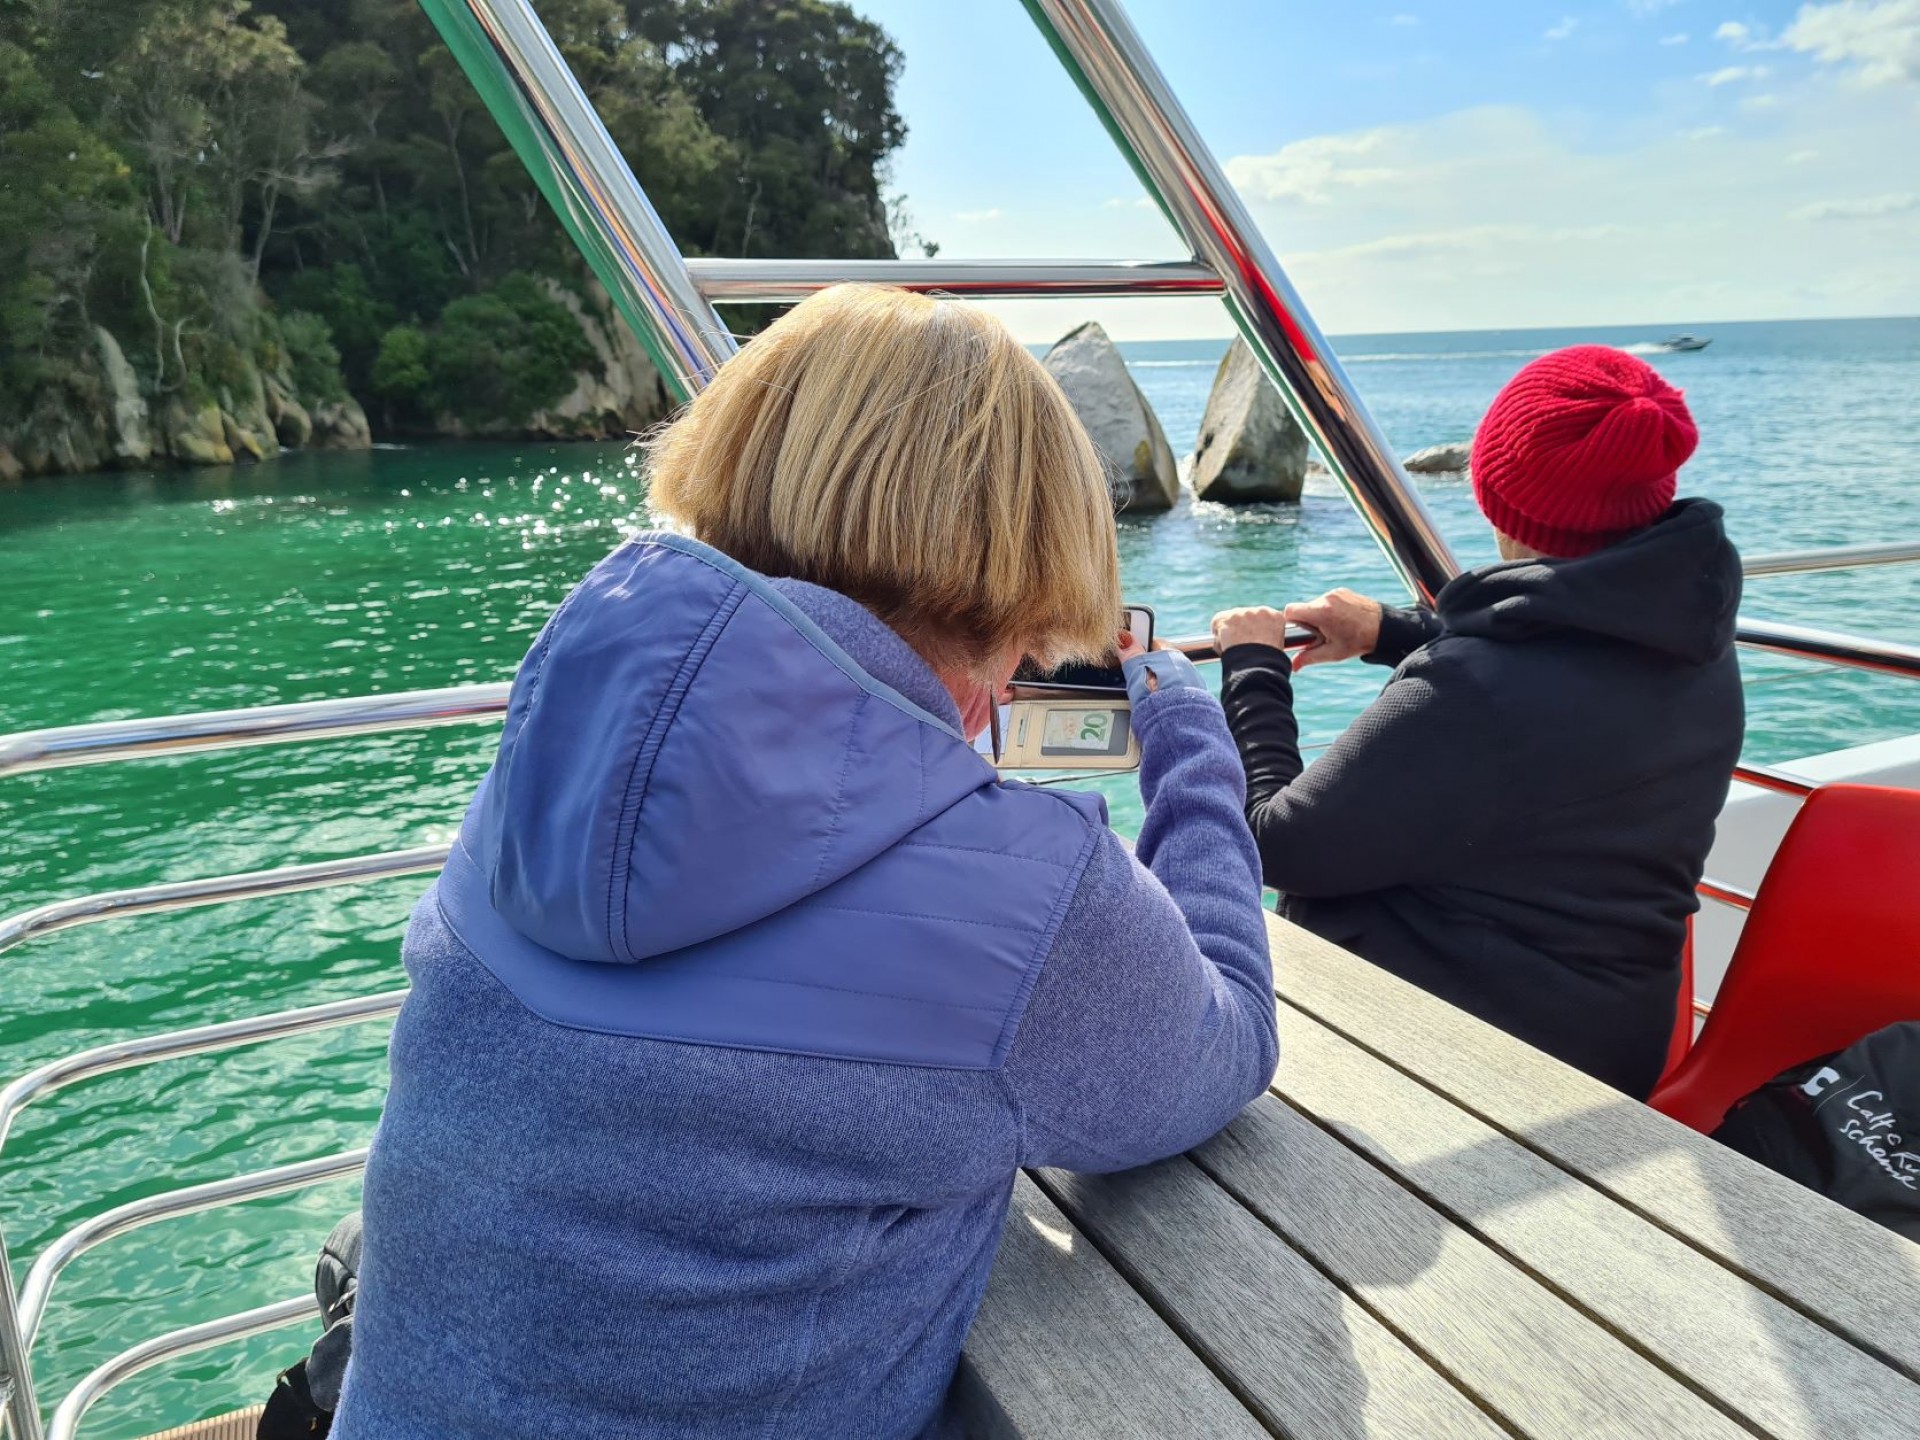 Glorious Golden Bay , Farewell Spit And Abel Tasman Lodges